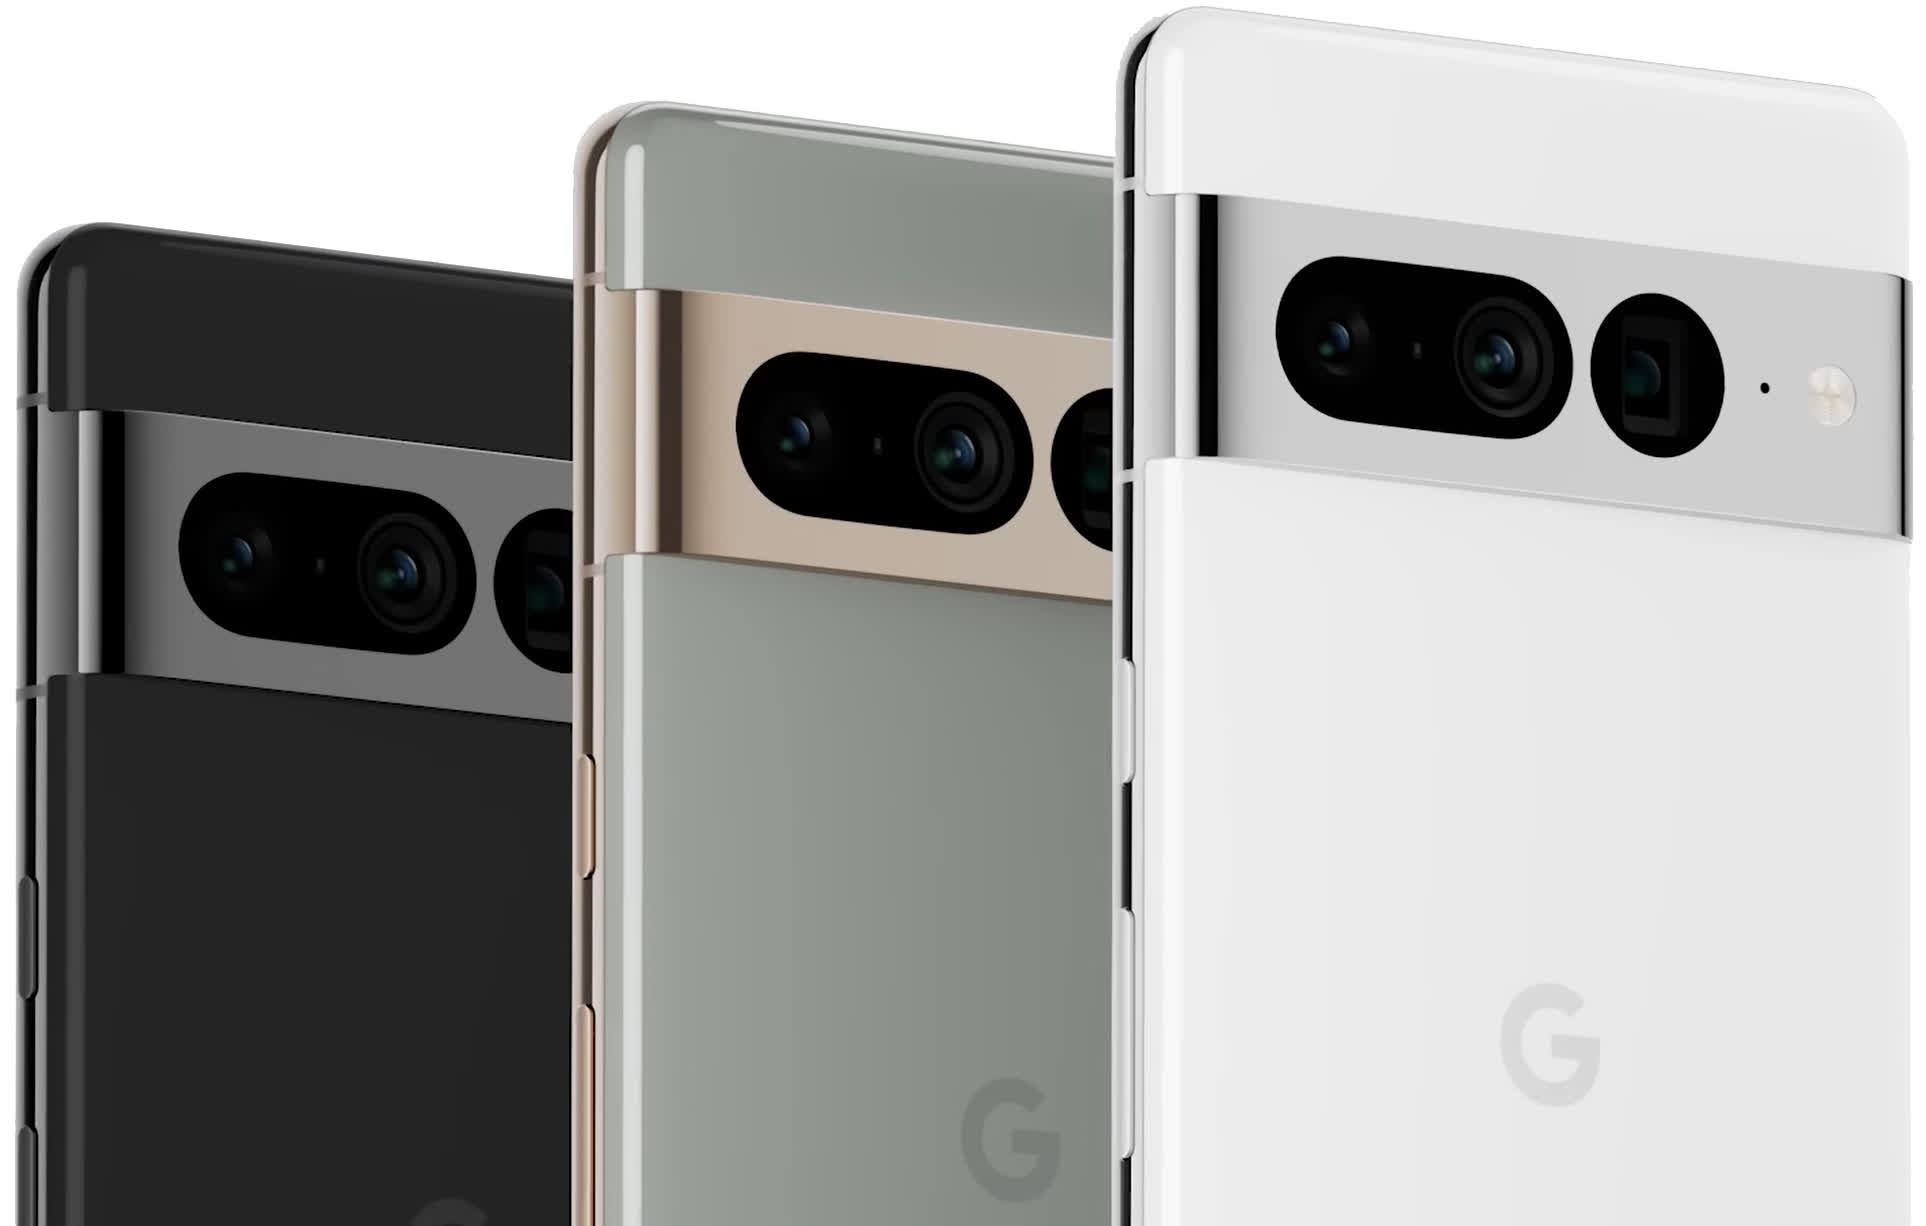 Google launches the Pixel 7 and Pixel 7 Pro starting at $599 and $899